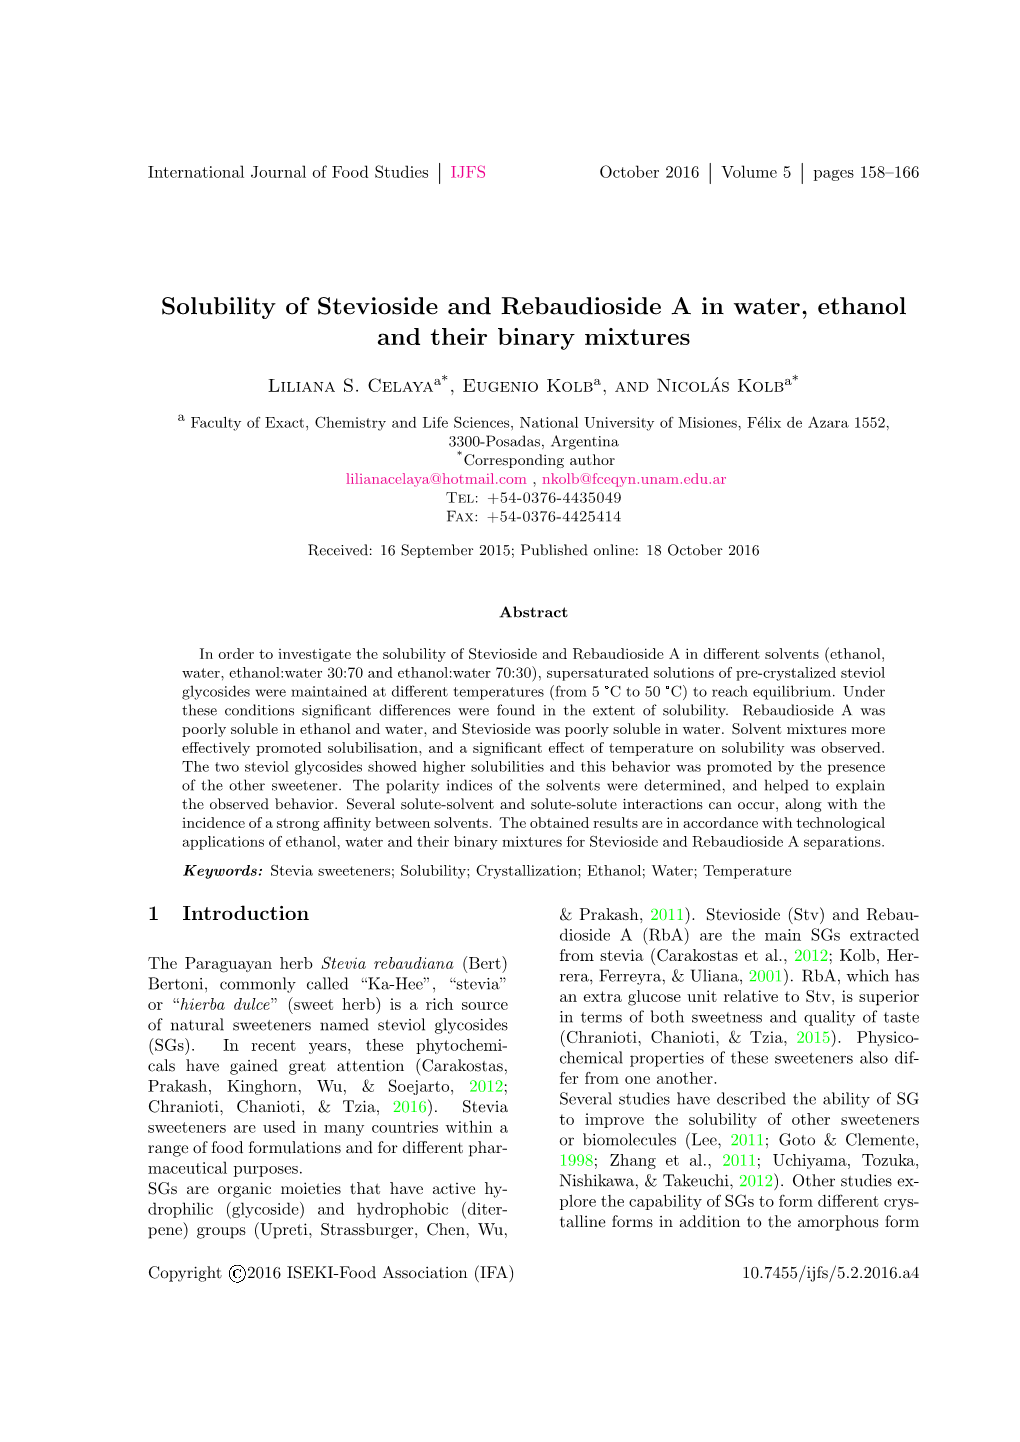 Solubility of Stevioside and Rebaudioside a in Water, Ethanol and Their Binary Mixtures